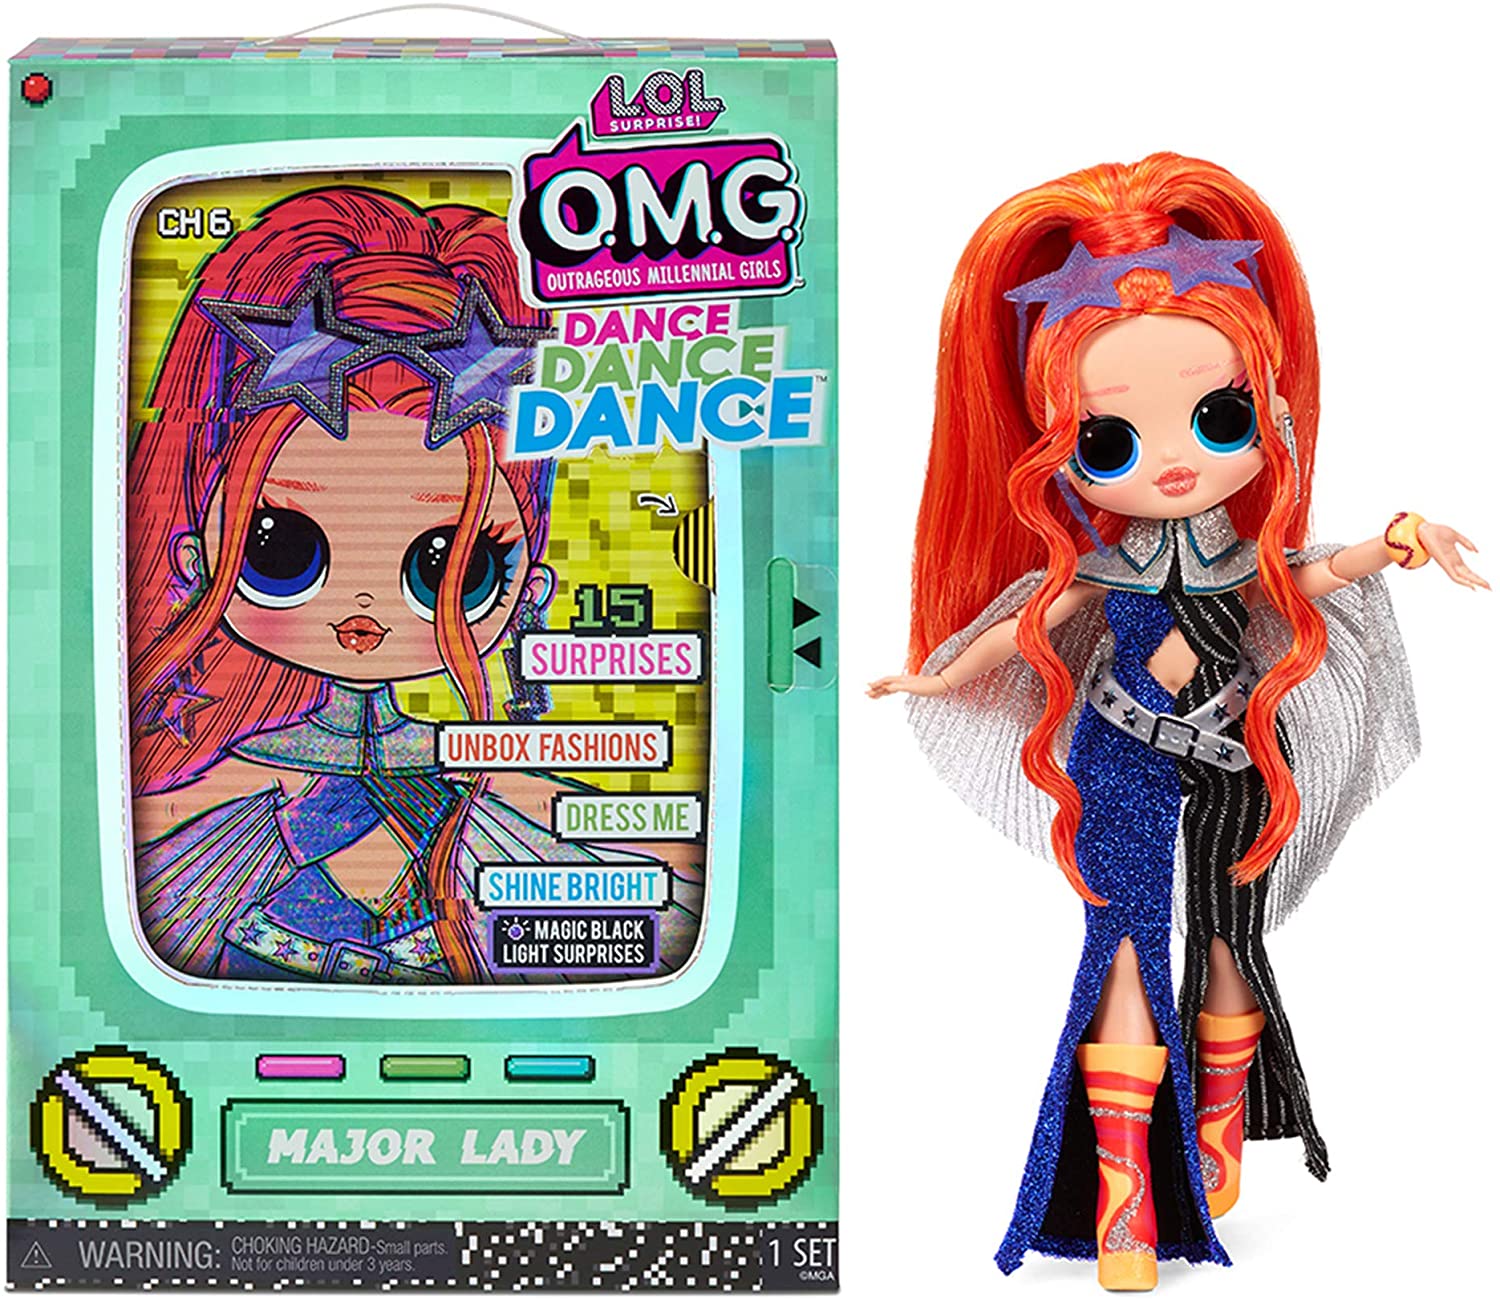 LOL Surprise OMG Dance Dance Dance Major Lady Fashion Doll with 15 Surprises Including Magic Black Light, Shoes, Hair Brush, Doll Stand and TV Package L.O.L. Surprise! $15.4